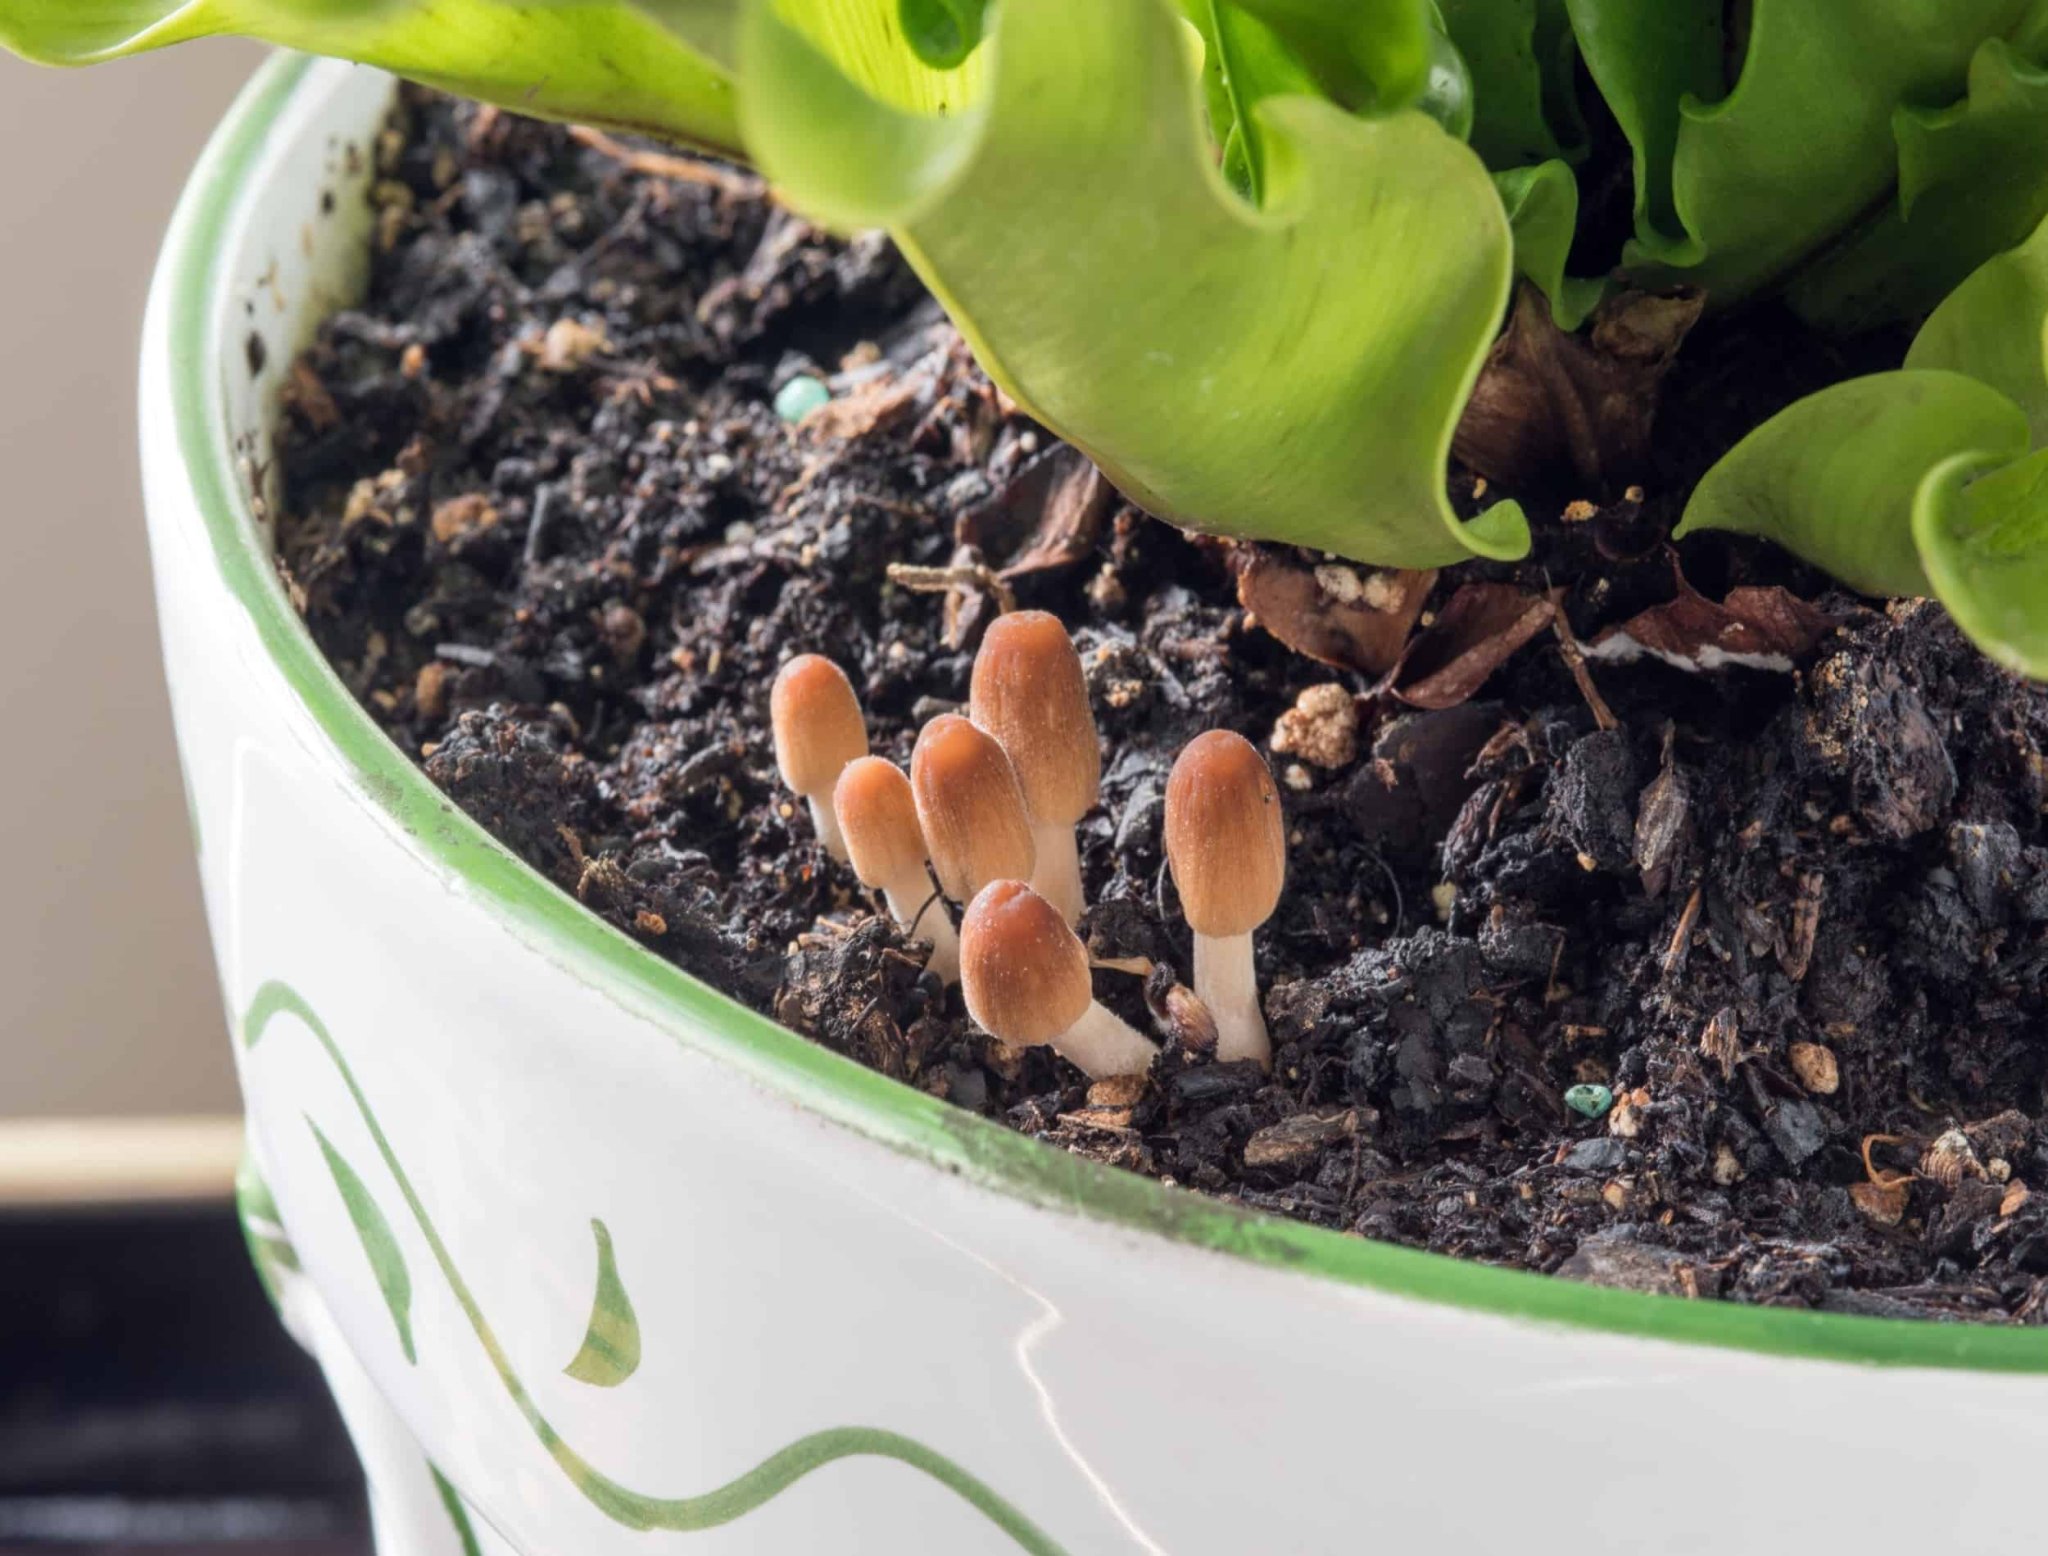 Why Mushrooms Are Growing in Your Potting Soil